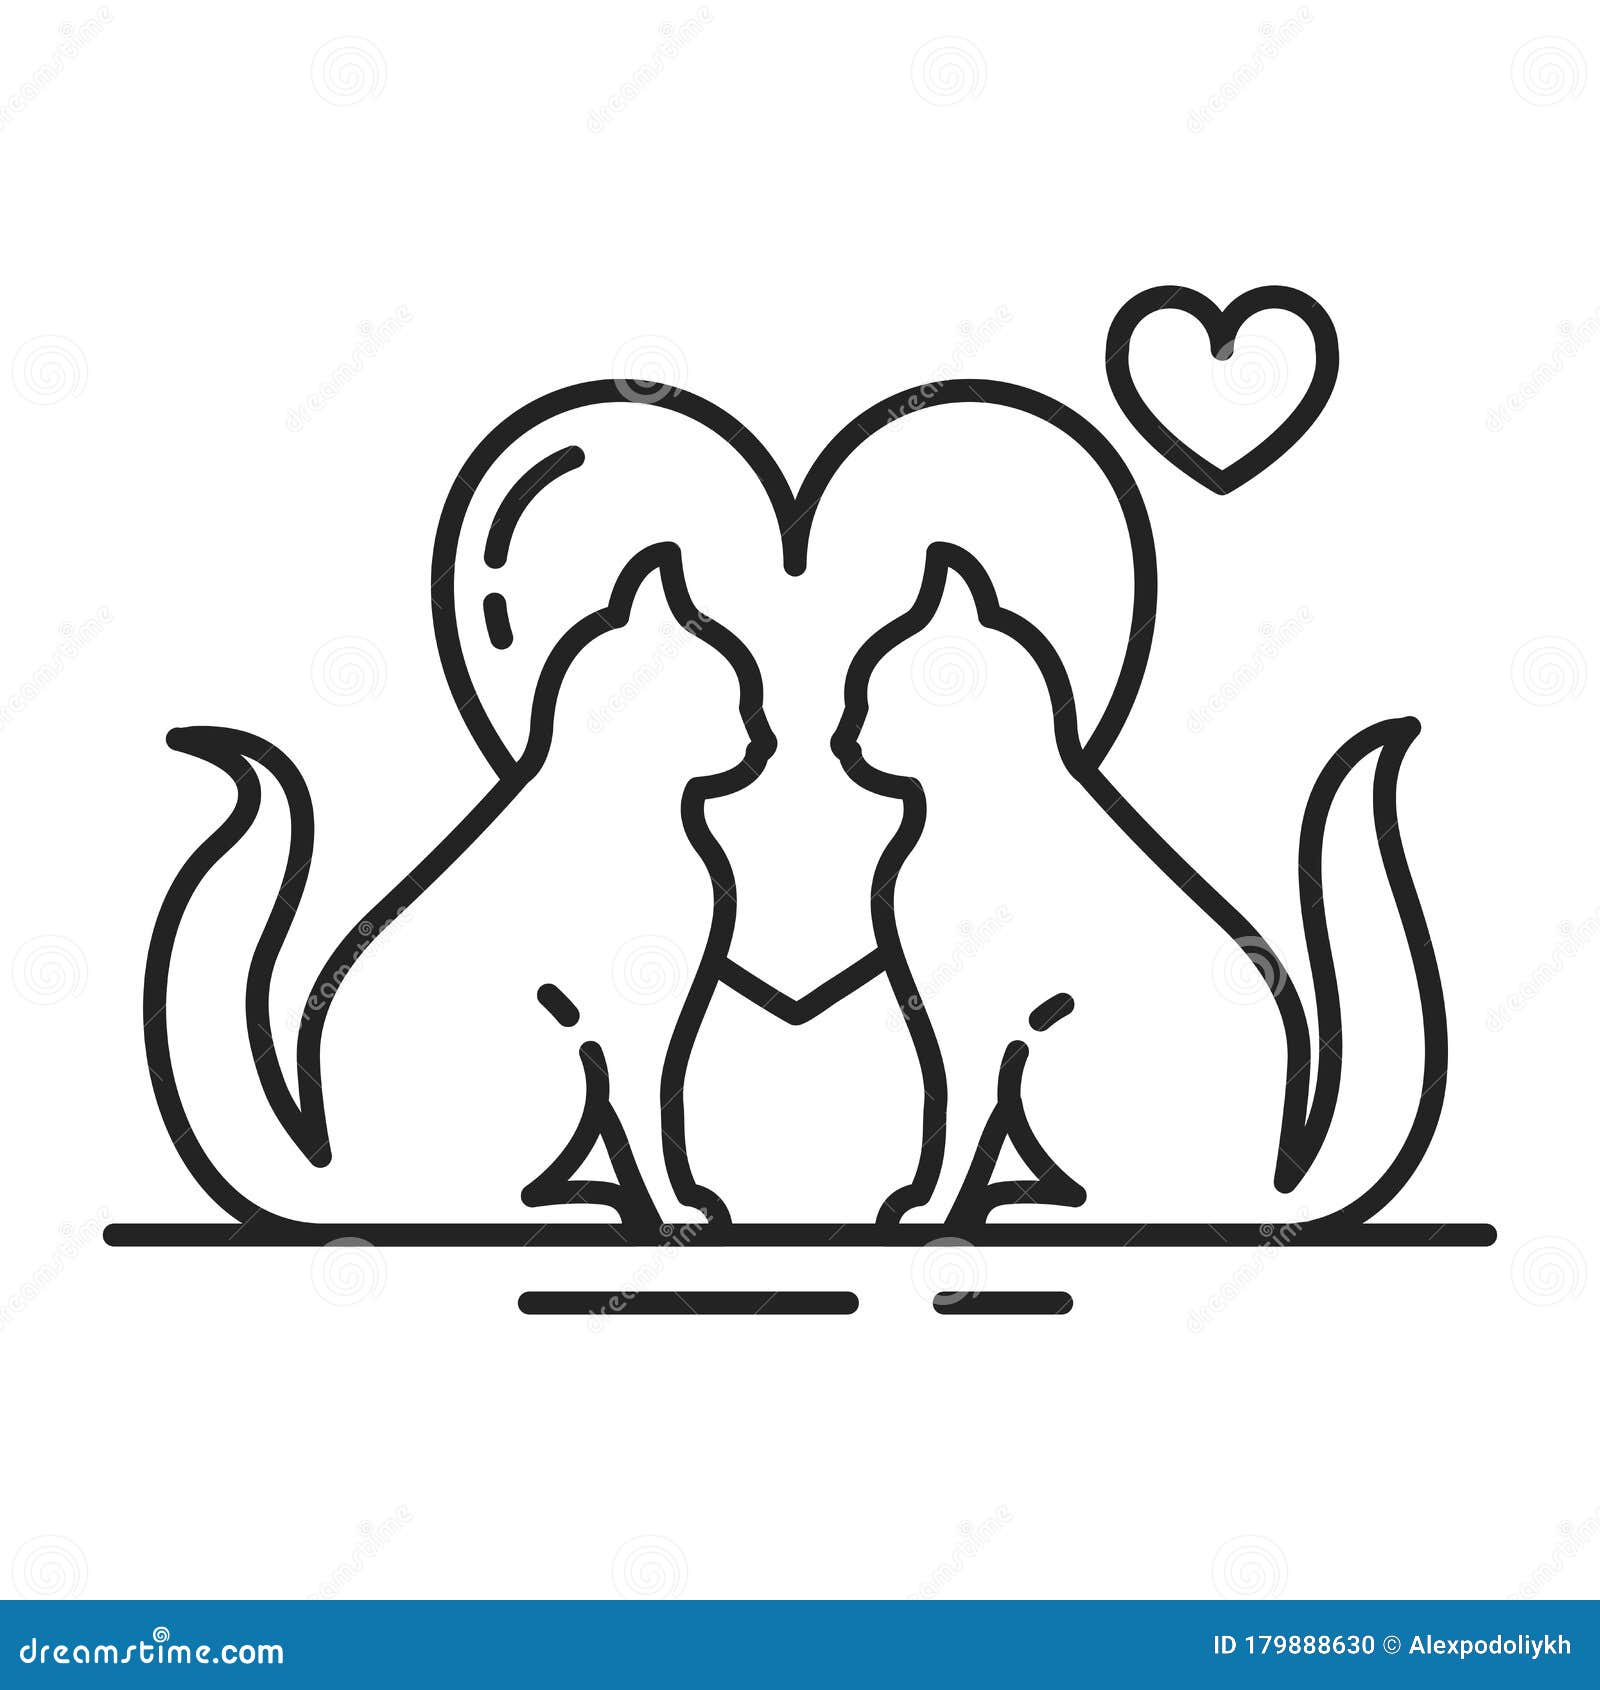 Mating Animals Black Line Icon. Combination of Two Animal Individuals,  Serving Reproduction Stock Illustration - Illustration of instinct, drawing:  179888630